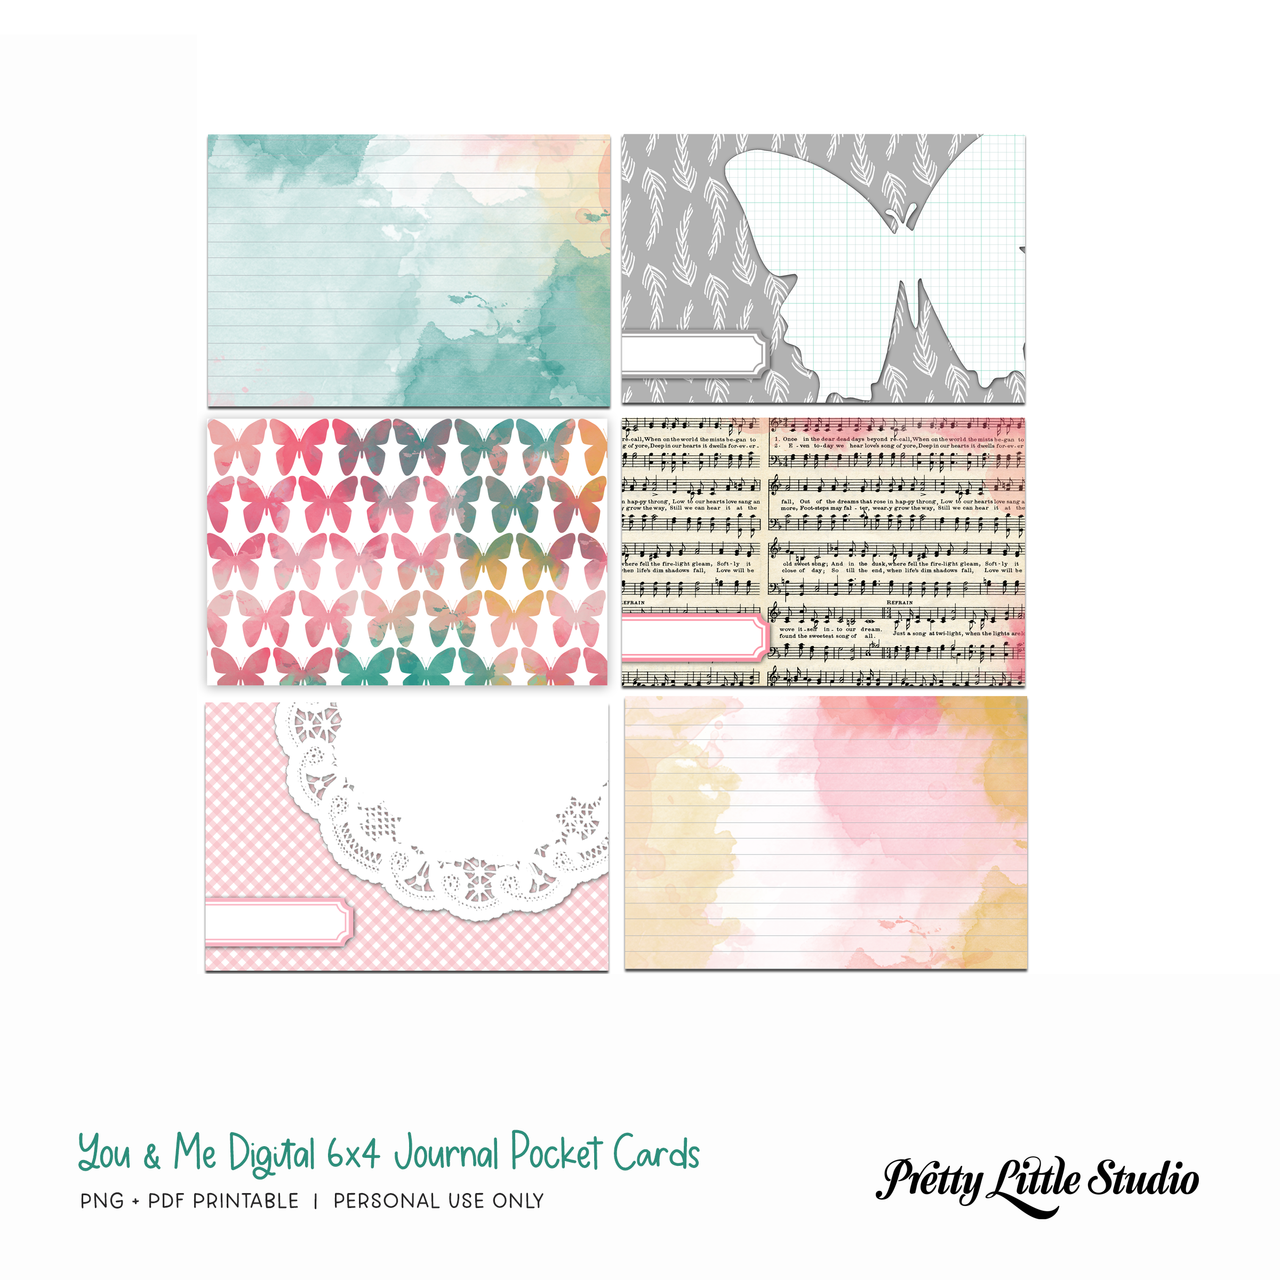 Let's Create Double-Sided Cardstock 12X12-4X6 Journaling Cards